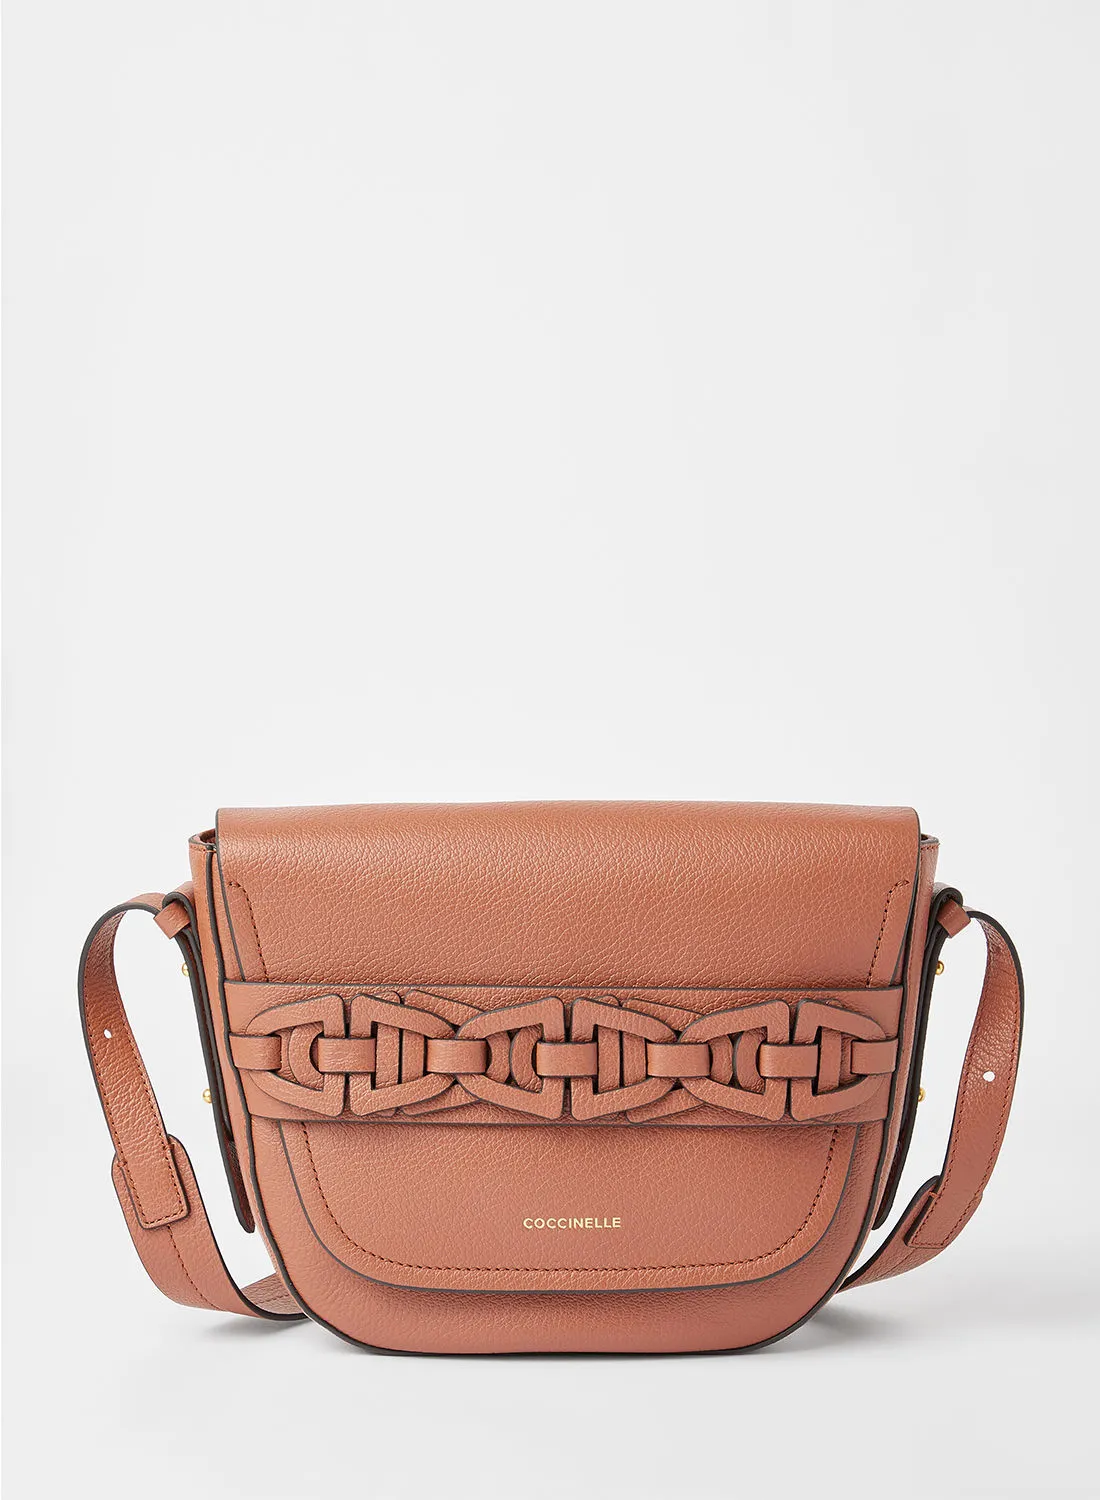 COCCINELLE Textured Leather Crossbody Bag Brown